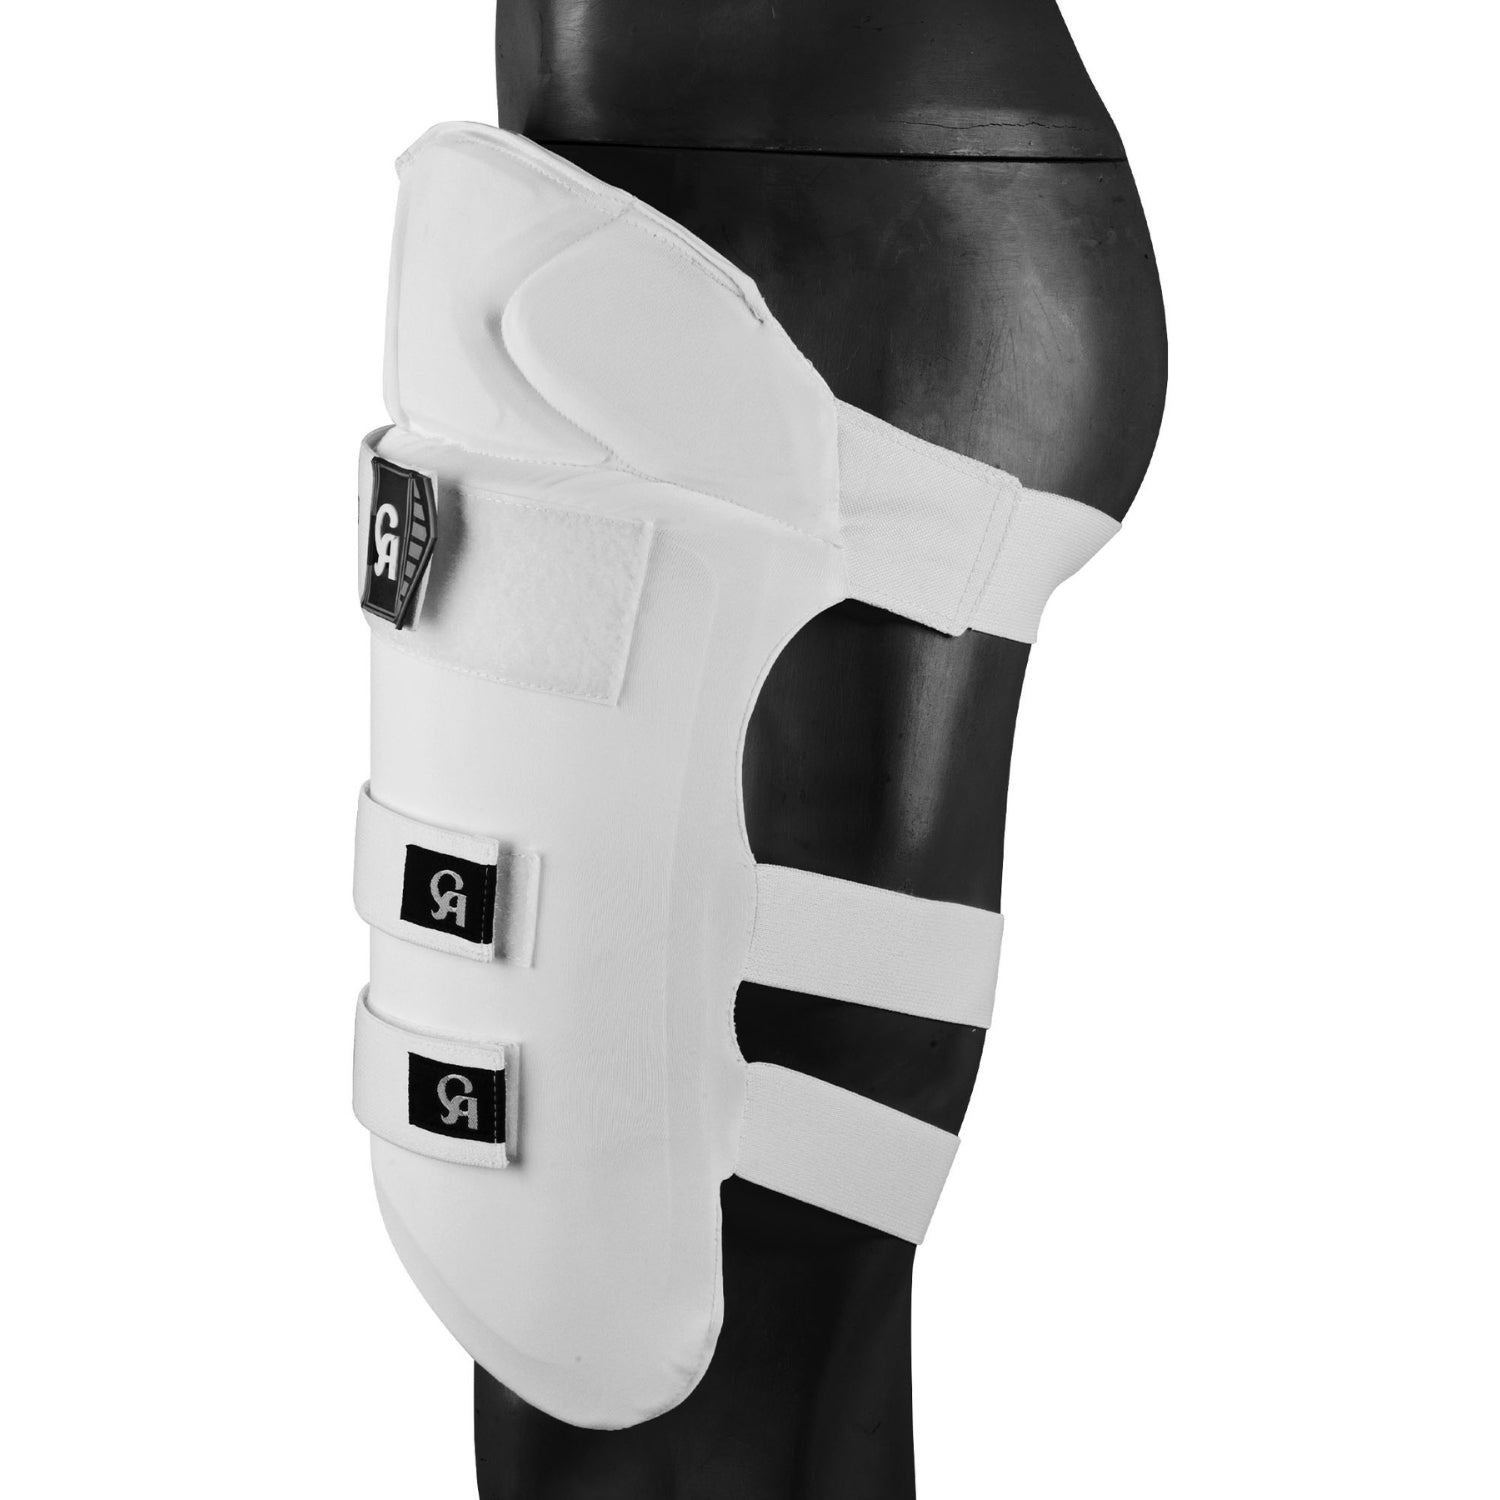 CA Thigh Pads, CA PERFORMANCE 15000, Adult